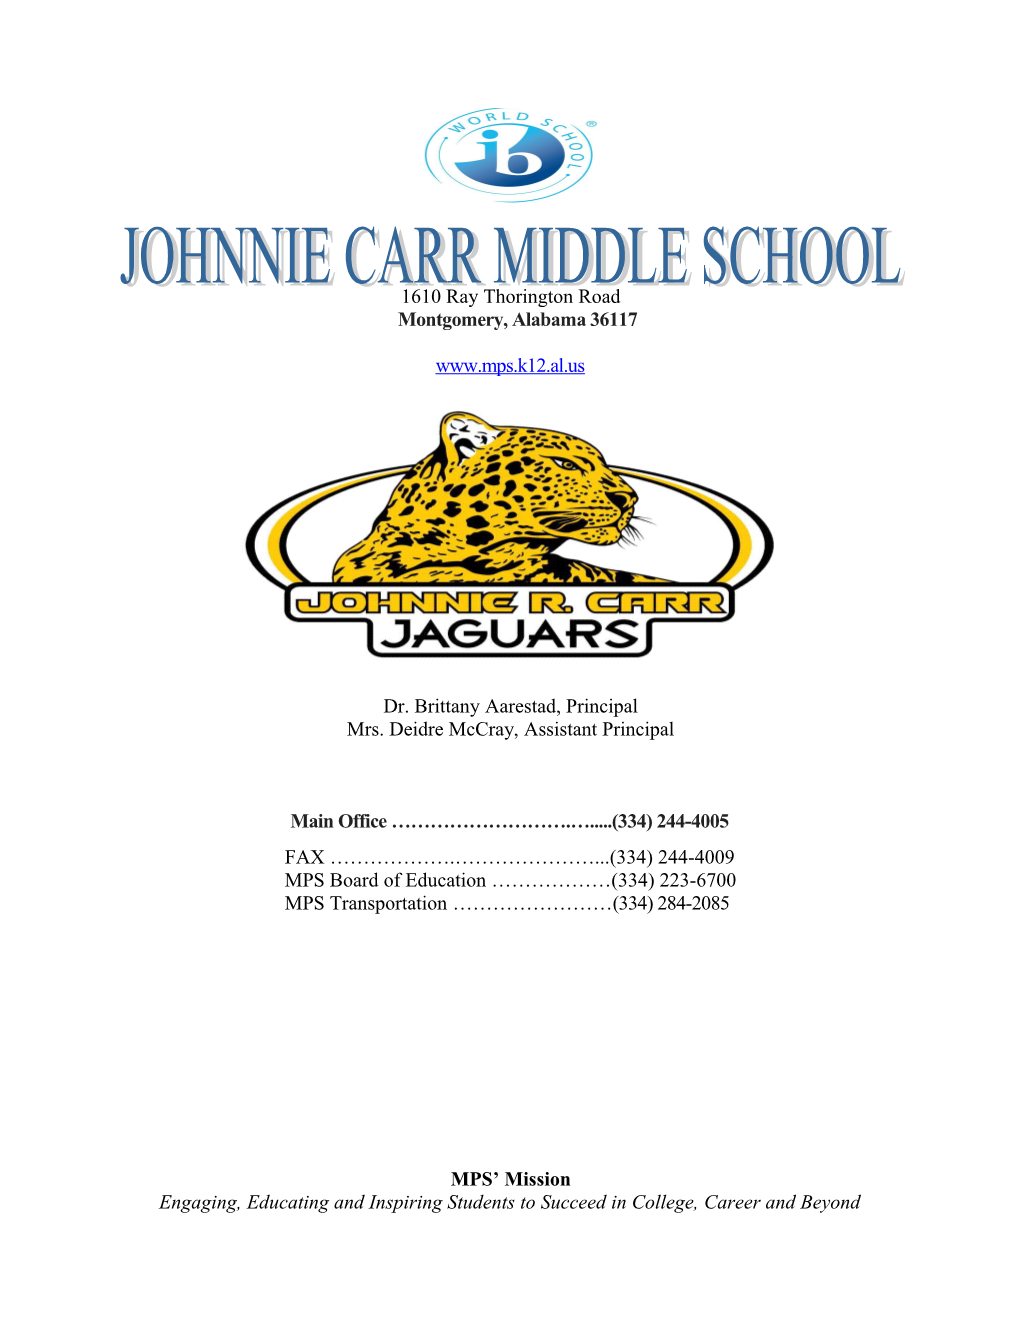 Johnnie Carr Middle School